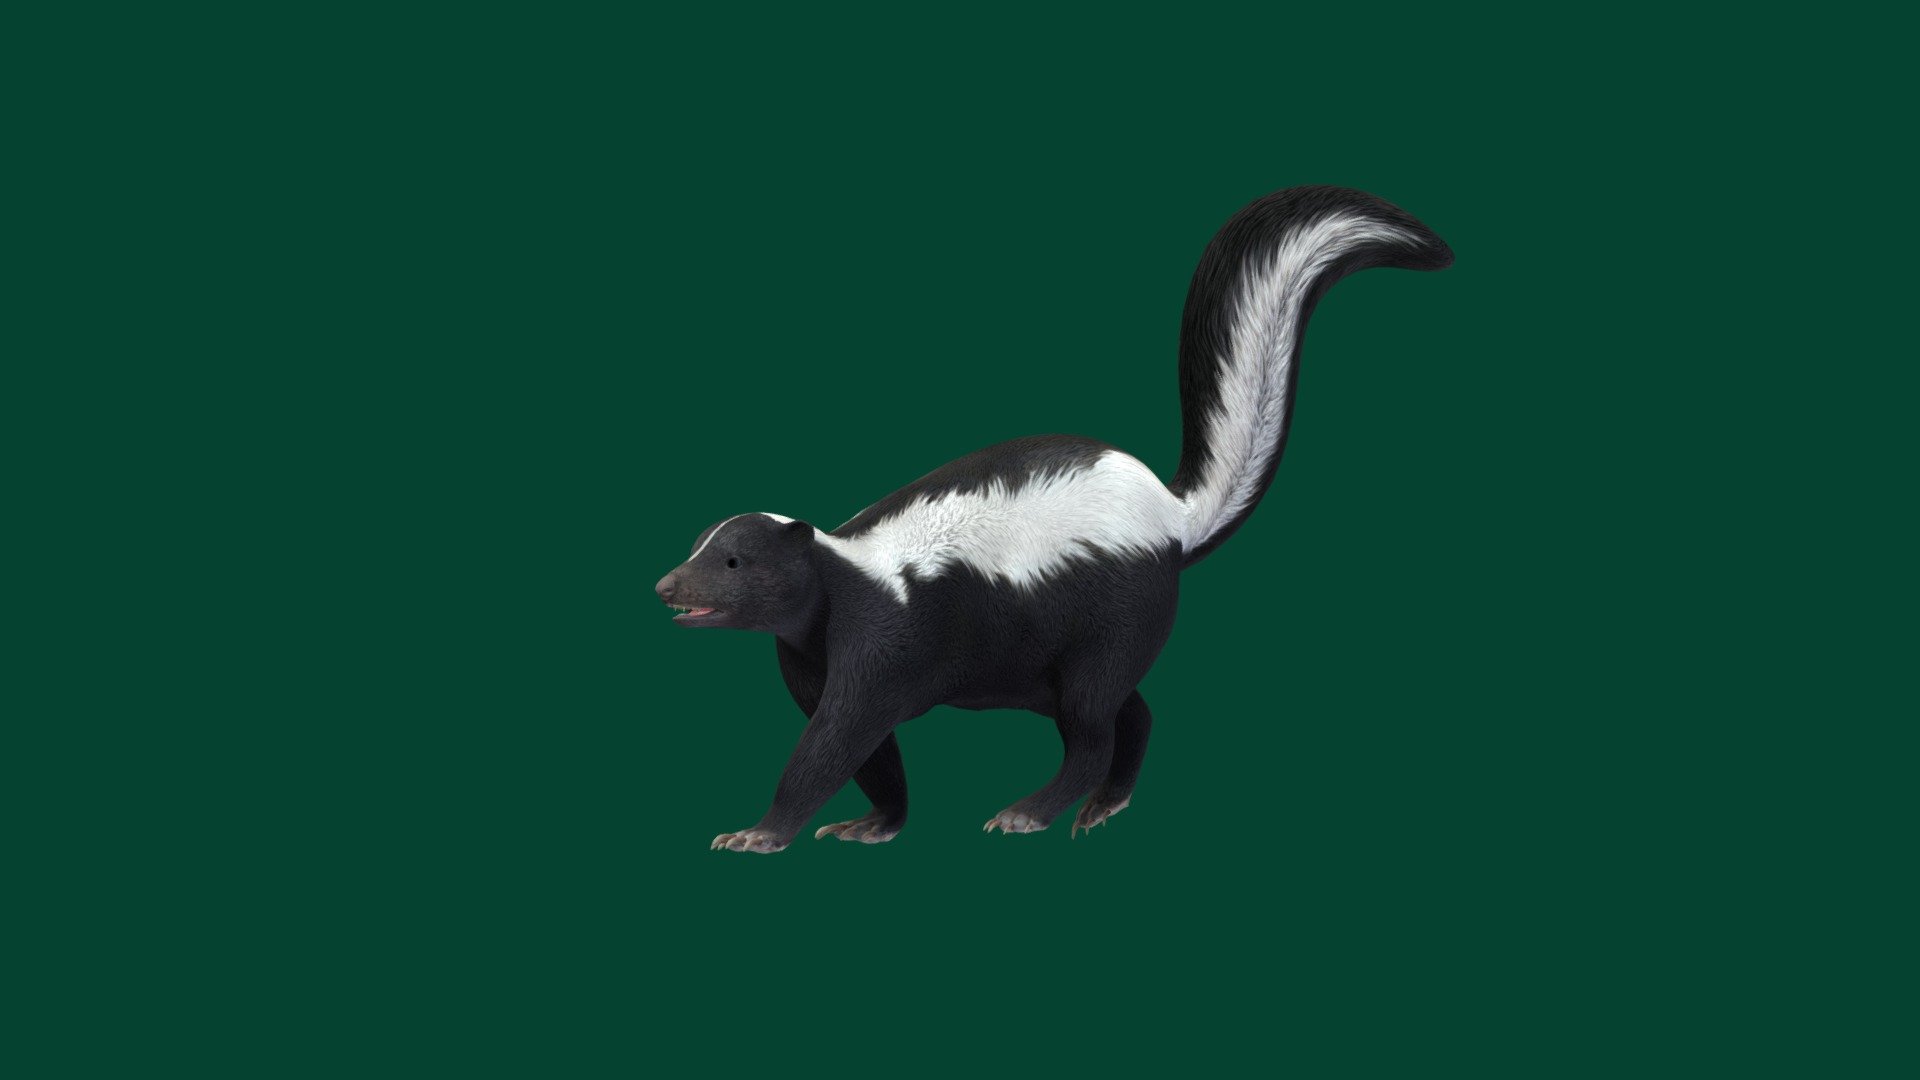 Mephitidae Skunk

Skunk Animal Mammal  (H)

1 Draw Calls

Game Ready 

8 Animations

4K -2K. PBR Textures Material

Unreal FBX

Unity FBX  

Blend File 

USDZ File (AR Ready). Real Scale Dimension

Textures Files

GLB File

Gltf File ( Spark AR, Lens Studio(SnapChat) , Effector(Tiktok) , Spline, Play Canvas ) Compatible

Vertices      -   18994
Triangles    -   37364

Diffuse , Metallic, Roughness , Normal Map ,Specular Map,Specular Tint

Skunks are mammals in the family Mephitidae. They are known for their ability to spray a liquid with a strong, unpleasant scent from their an al glands. Different species of skunk vary in appearance from black-and-white to brown, cream or ginger colored, but all have warning coloration. Wikipedia
Mass: Eastern spotted skunk: 600 g, MORE Encyclopedia of Life
Term for young: kit - Skunk (GameReady) - Buy Royalty Free 3D model by Nyilonelycompany 3d model